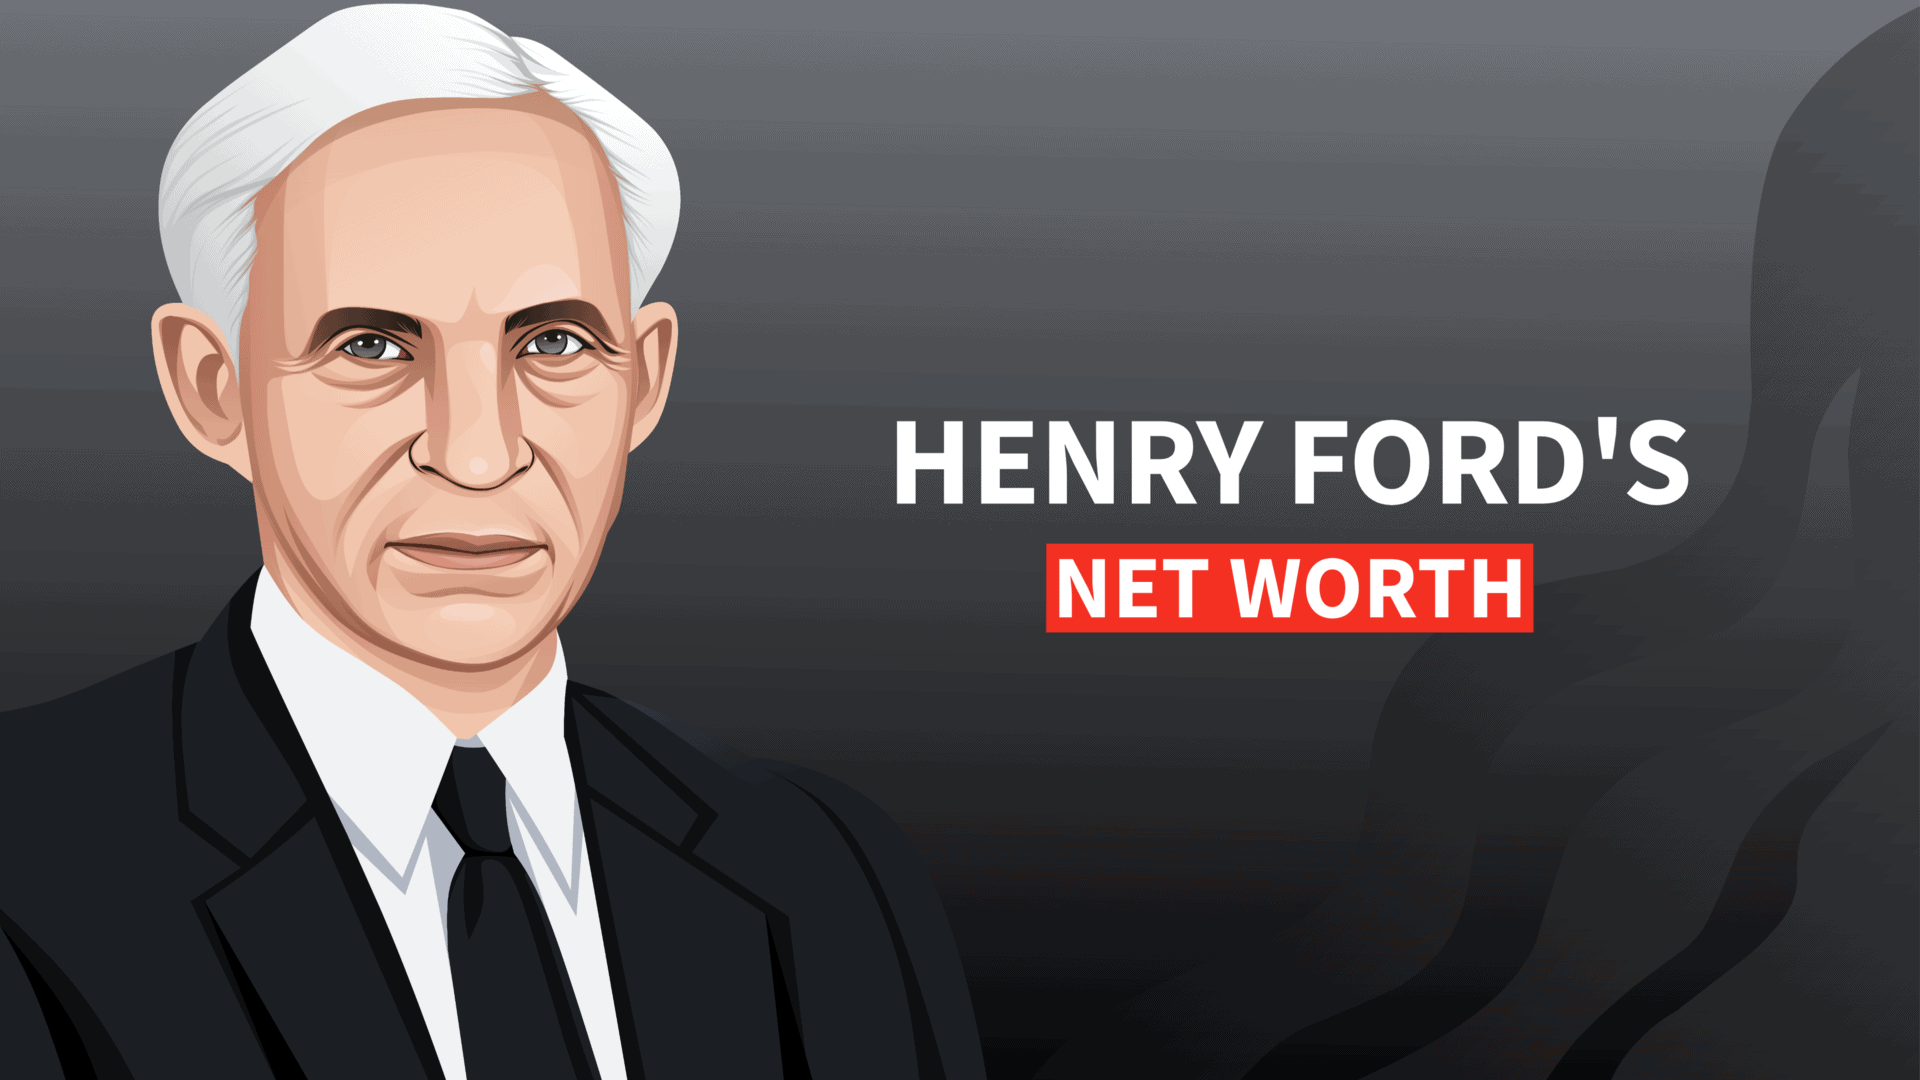 Henry Ford's Net Worth and Inspiring Story